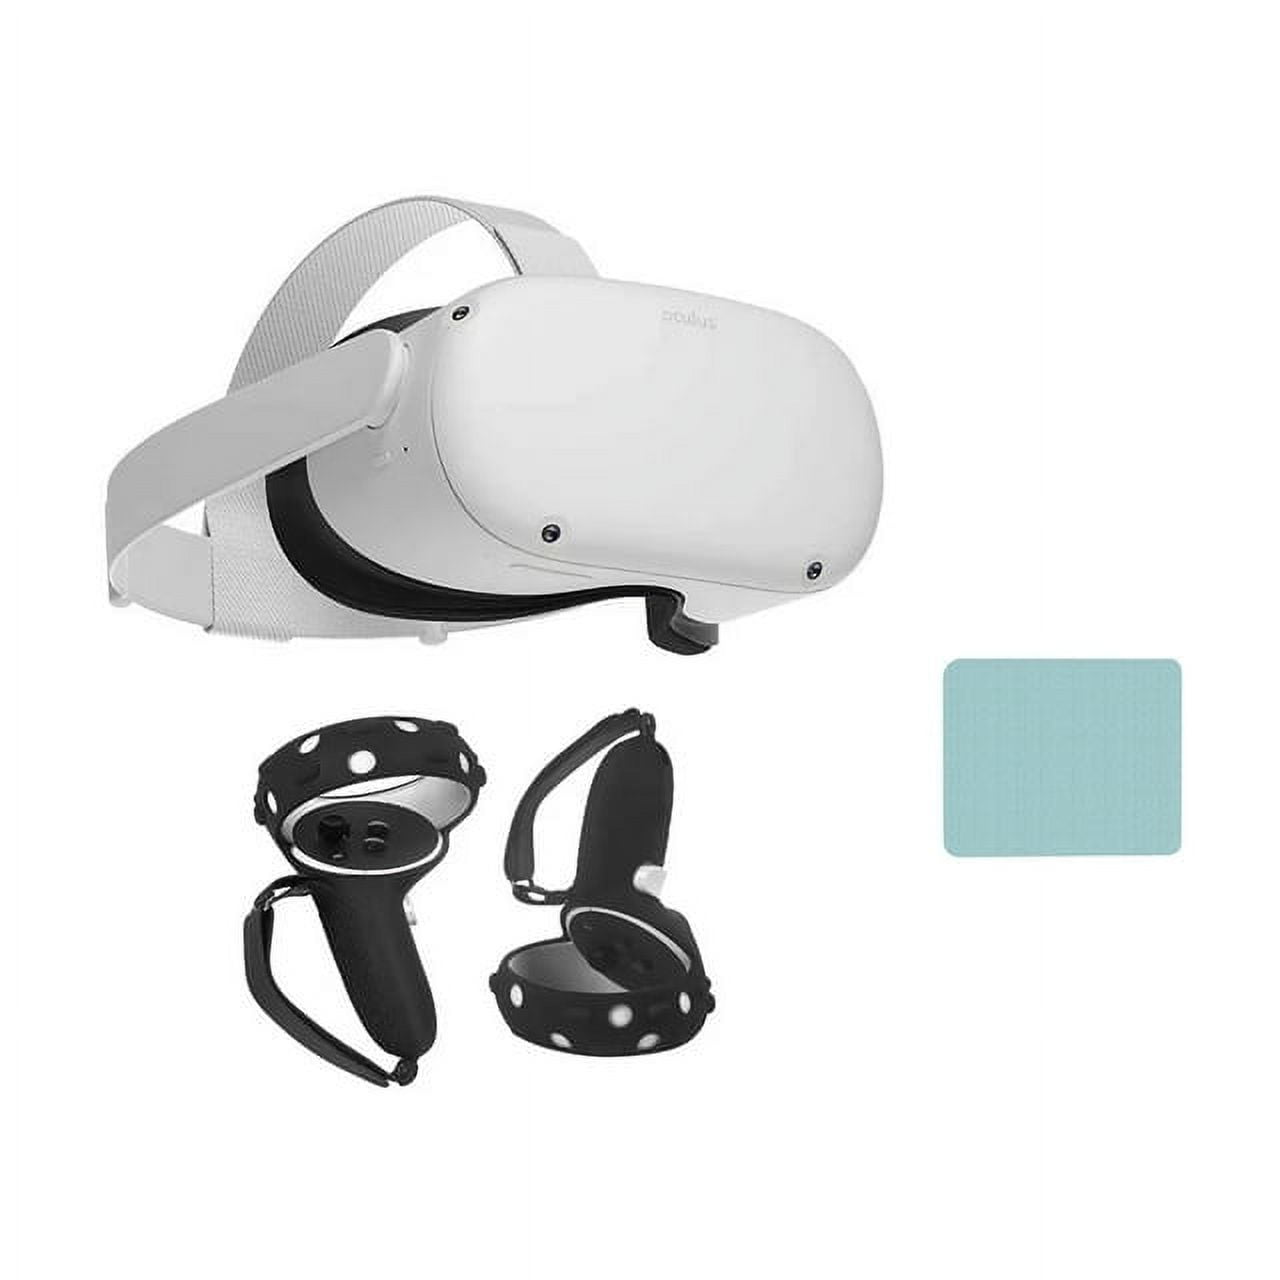 Meta Quest 2 Advanced All-In-One Virtual Reality Headset - 256GB -  301-00351-02 815820022466